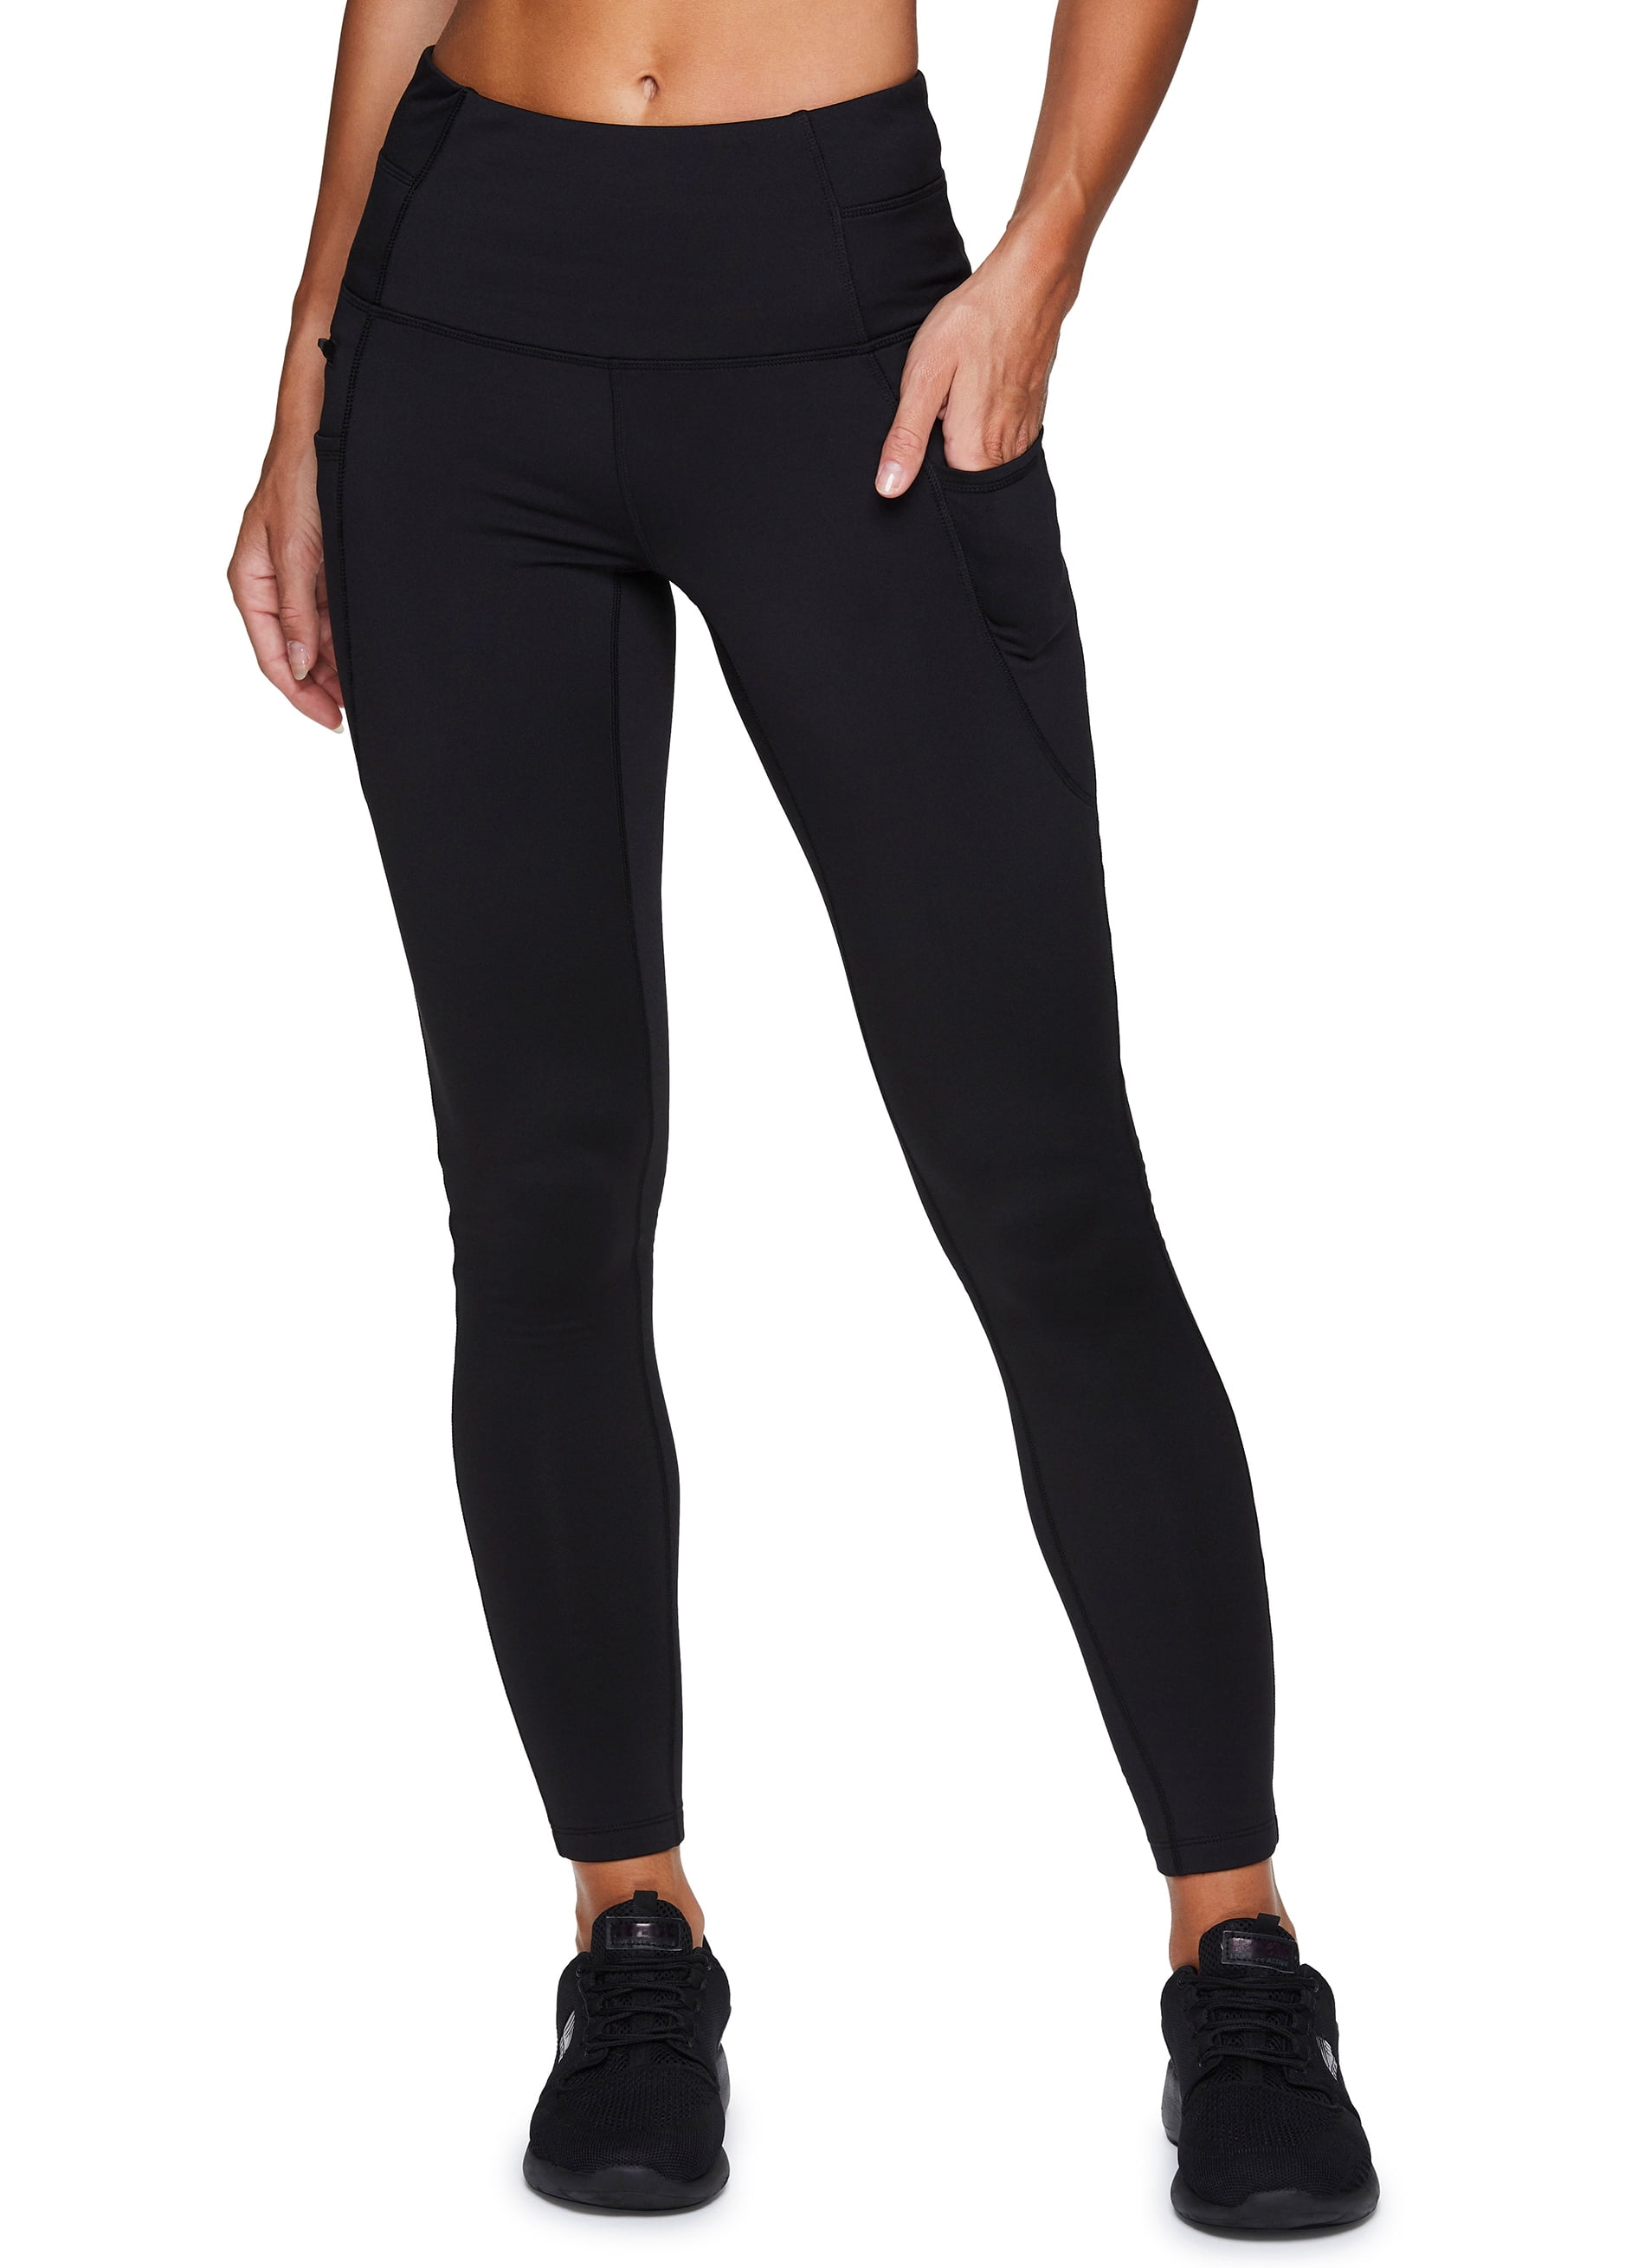 EVCR High Waisted Blocked Lined Leggings with Pockets for Women